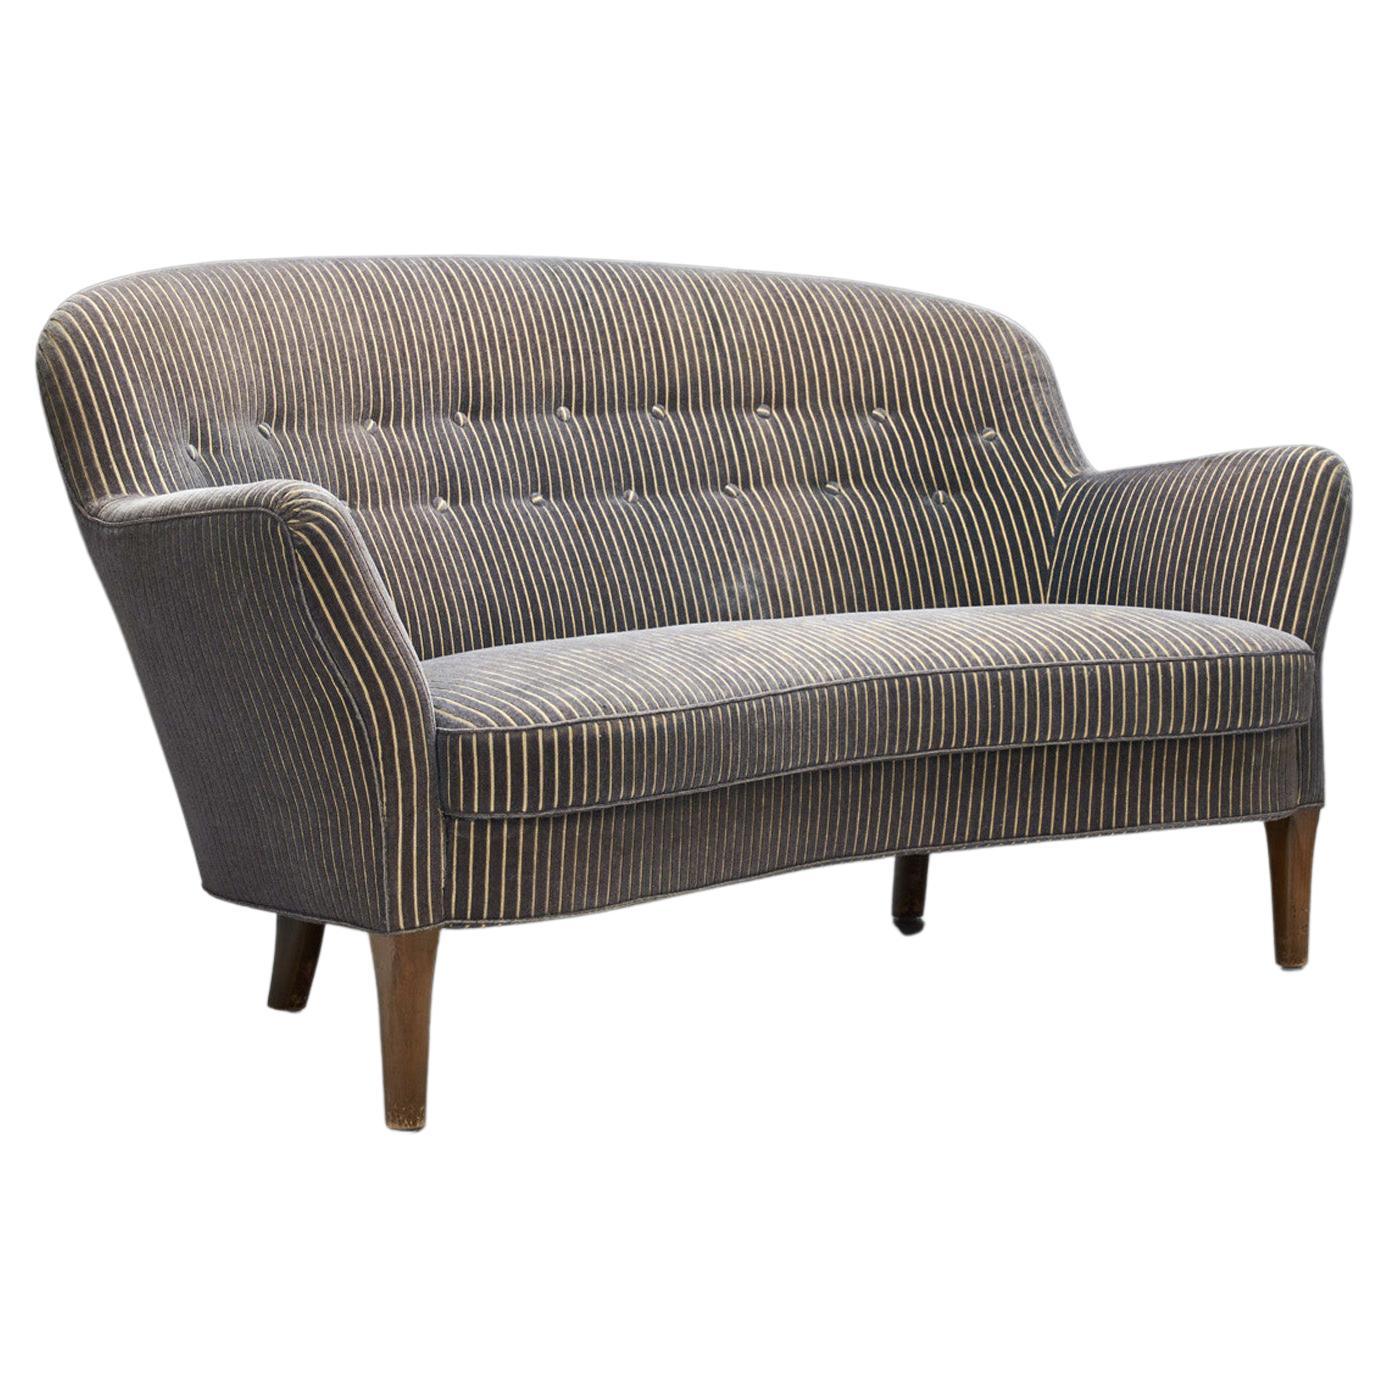 Danish Cabinetmaker Two-Seater Sofa with Striped Upholstery, Denmark 1940s For Sale